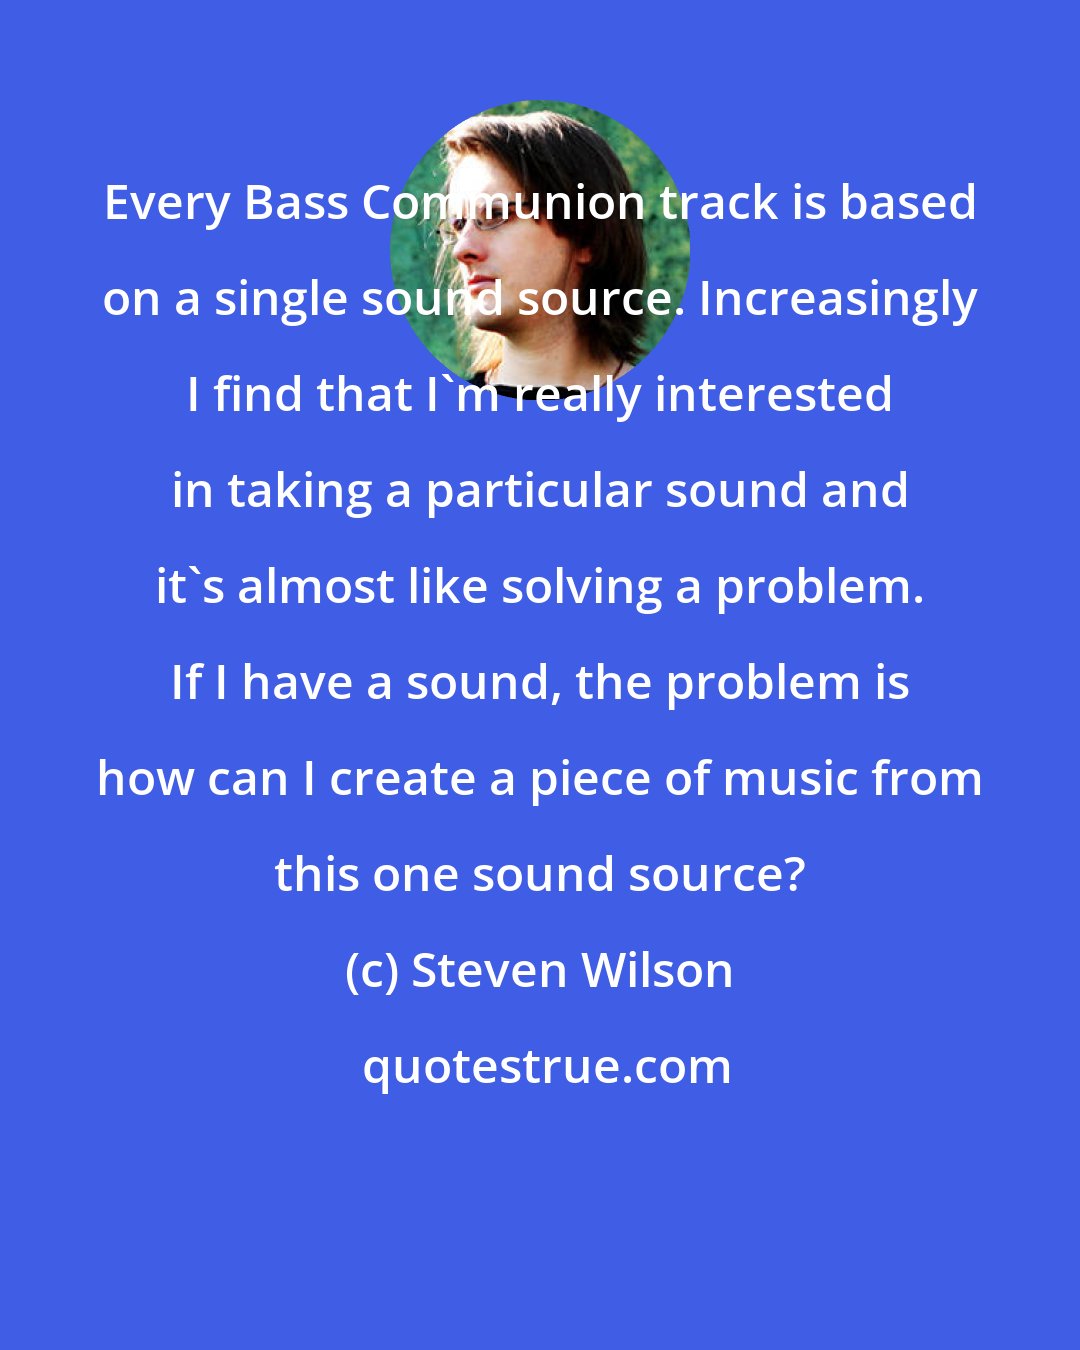 Steven Wilson: Every Bass Communion track is based on a single sound source. Increasingly I find that I'm really interested in taking a particular sound and it's almost like solving a problem. If I have a sound, the problem is how can I create a piece of music from this one sound source?